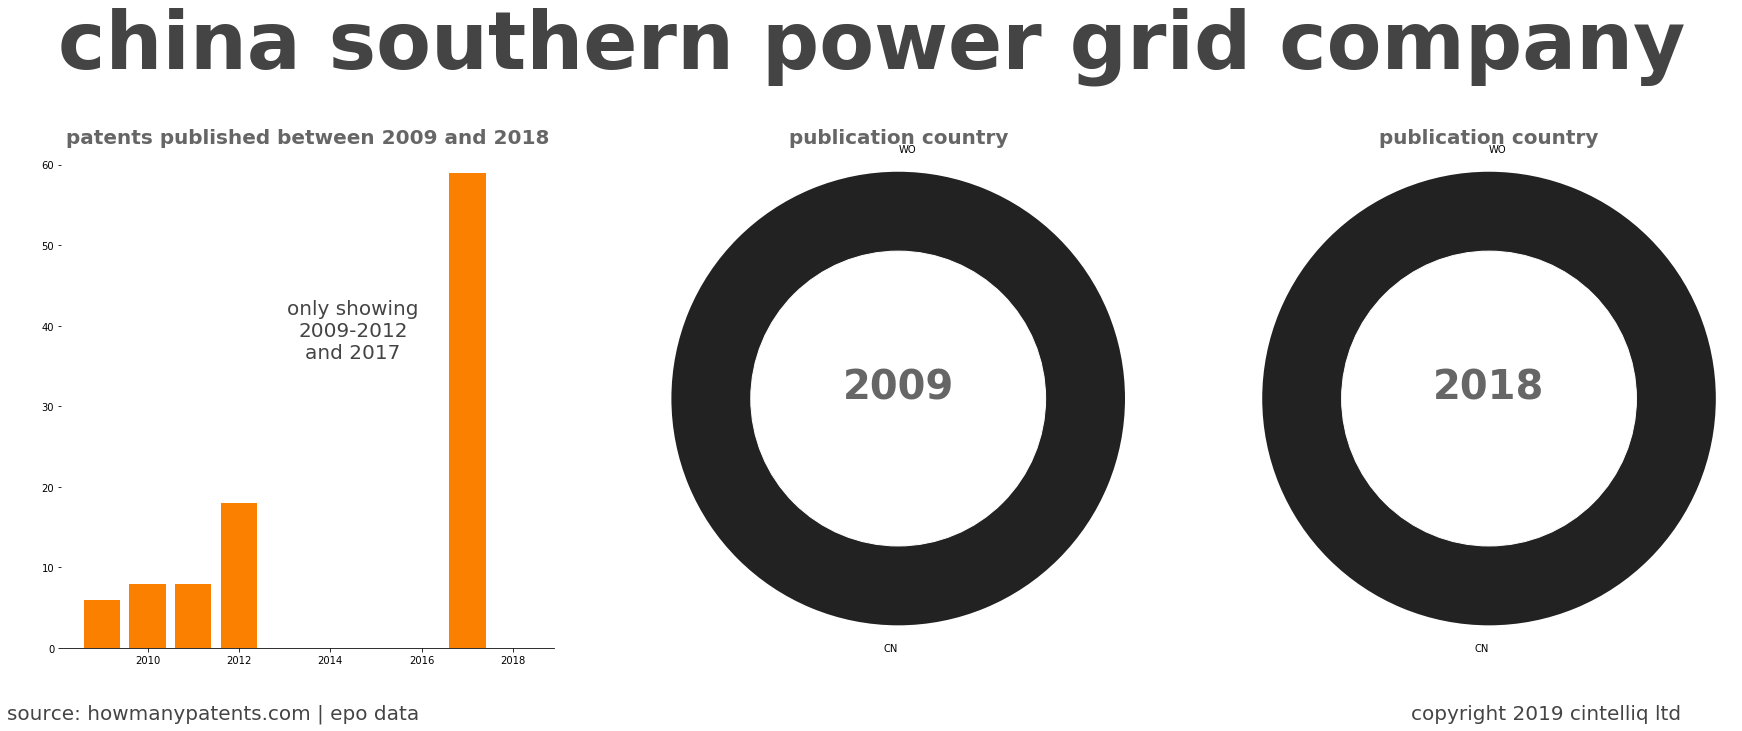 summary of patents for China Southern Power Grid Company